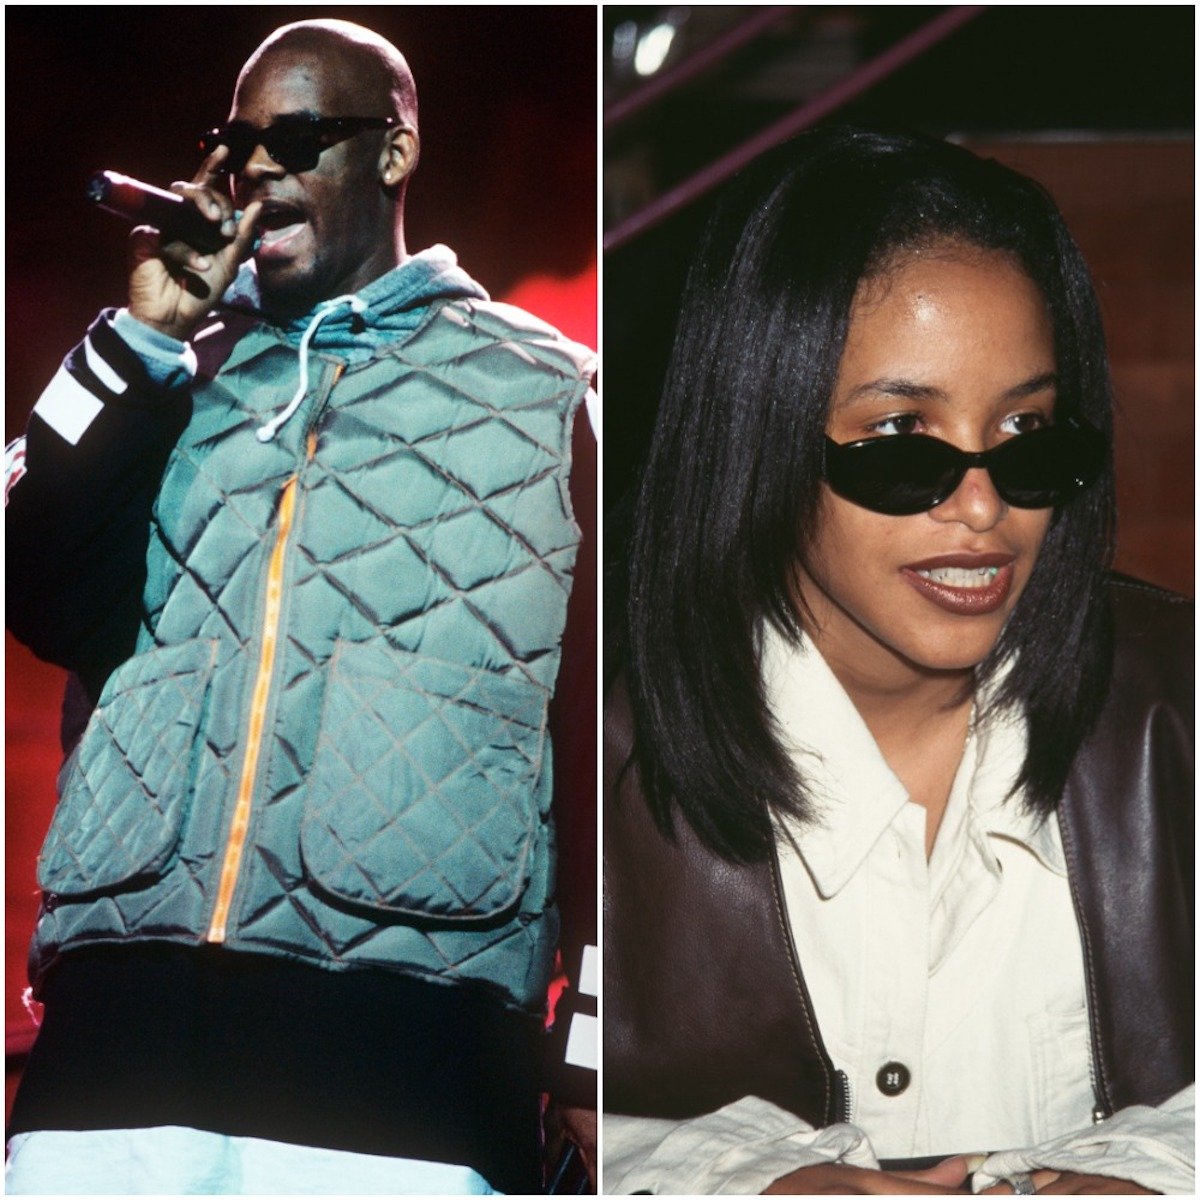 R. Kelly and Aalyah